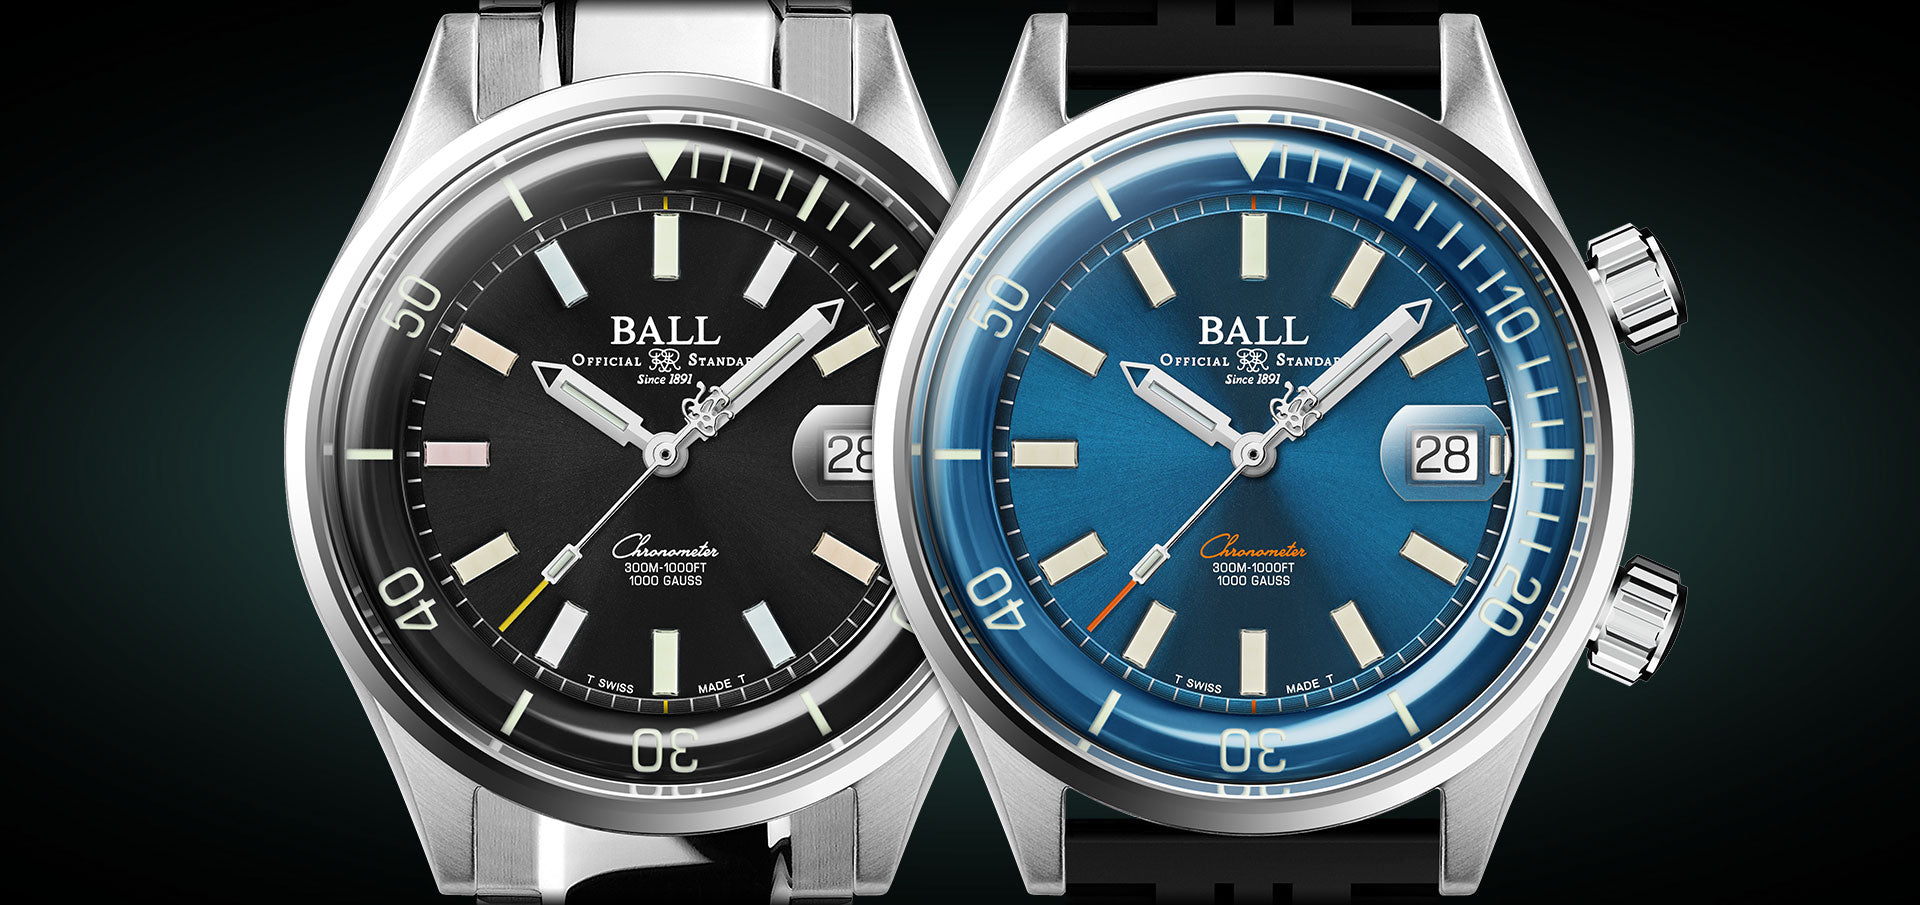 PREORDER BALL DM2280A-S1C-BK ENGINEER MASTER II DIVER LIMITED EDITION CHRONOMETER BLACK DIAL WATCH